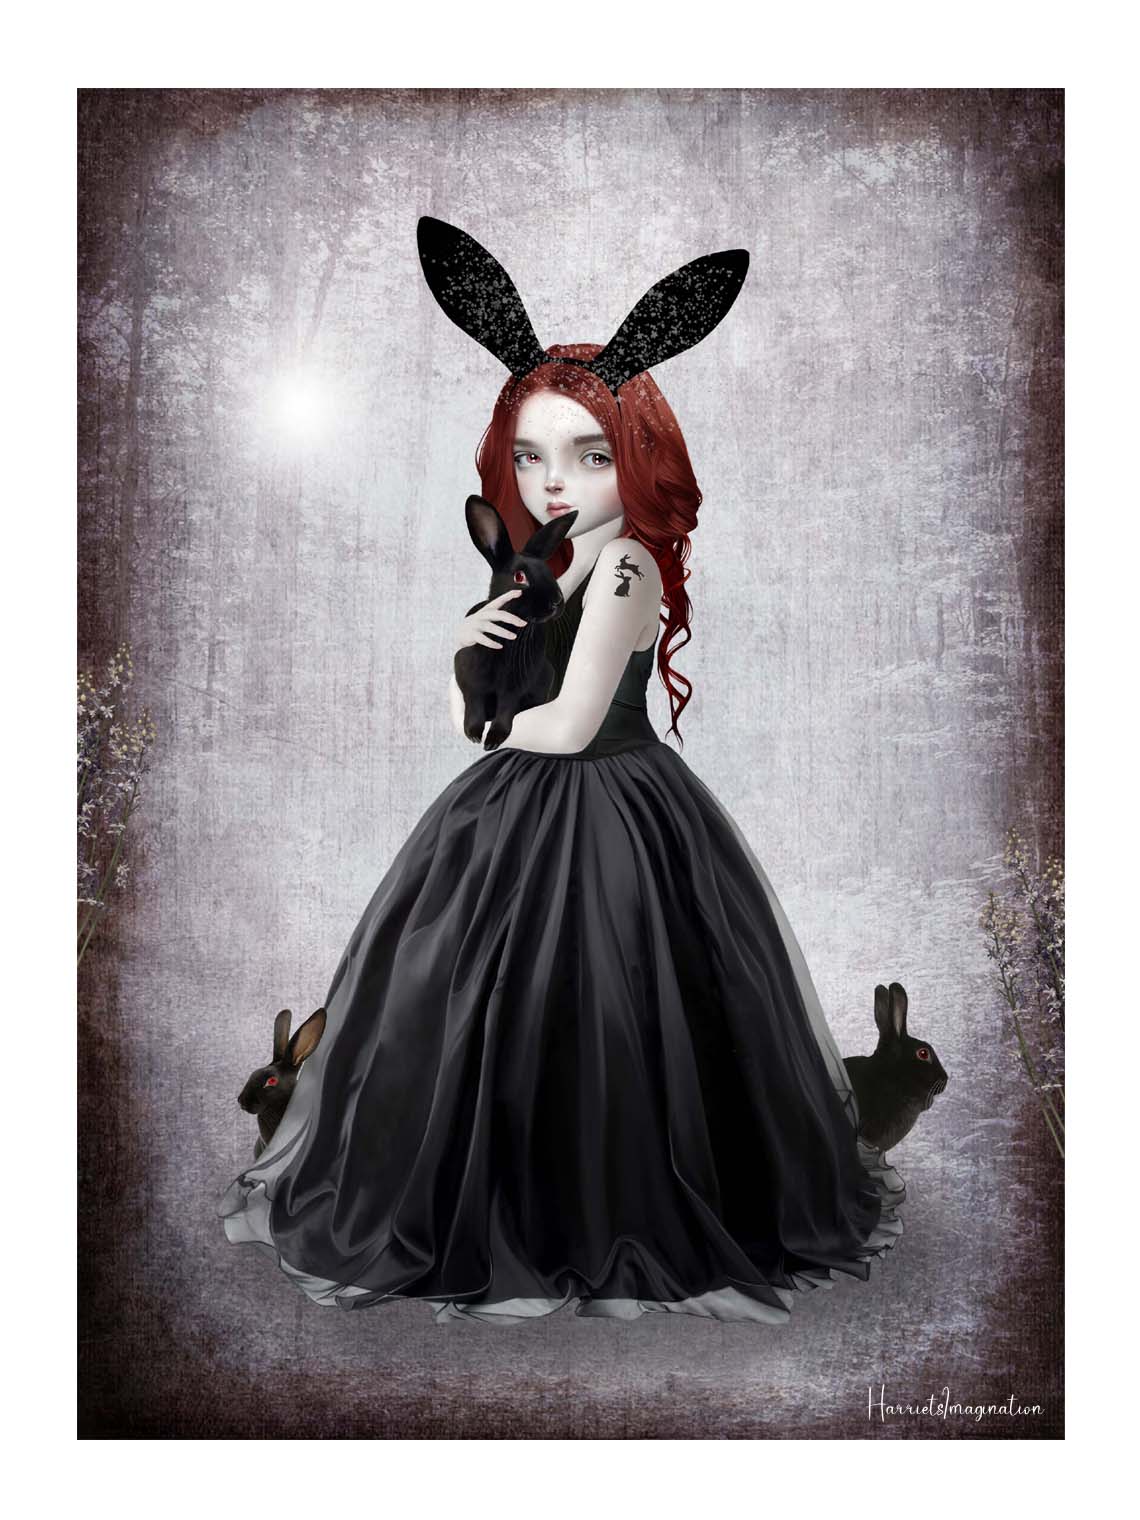 Surreal fantasy art print featuring a girl in a black gown surrounded by enigmatic black rabbits. Her red eyes mirror theirs, creating an eerie yet captivating connection.